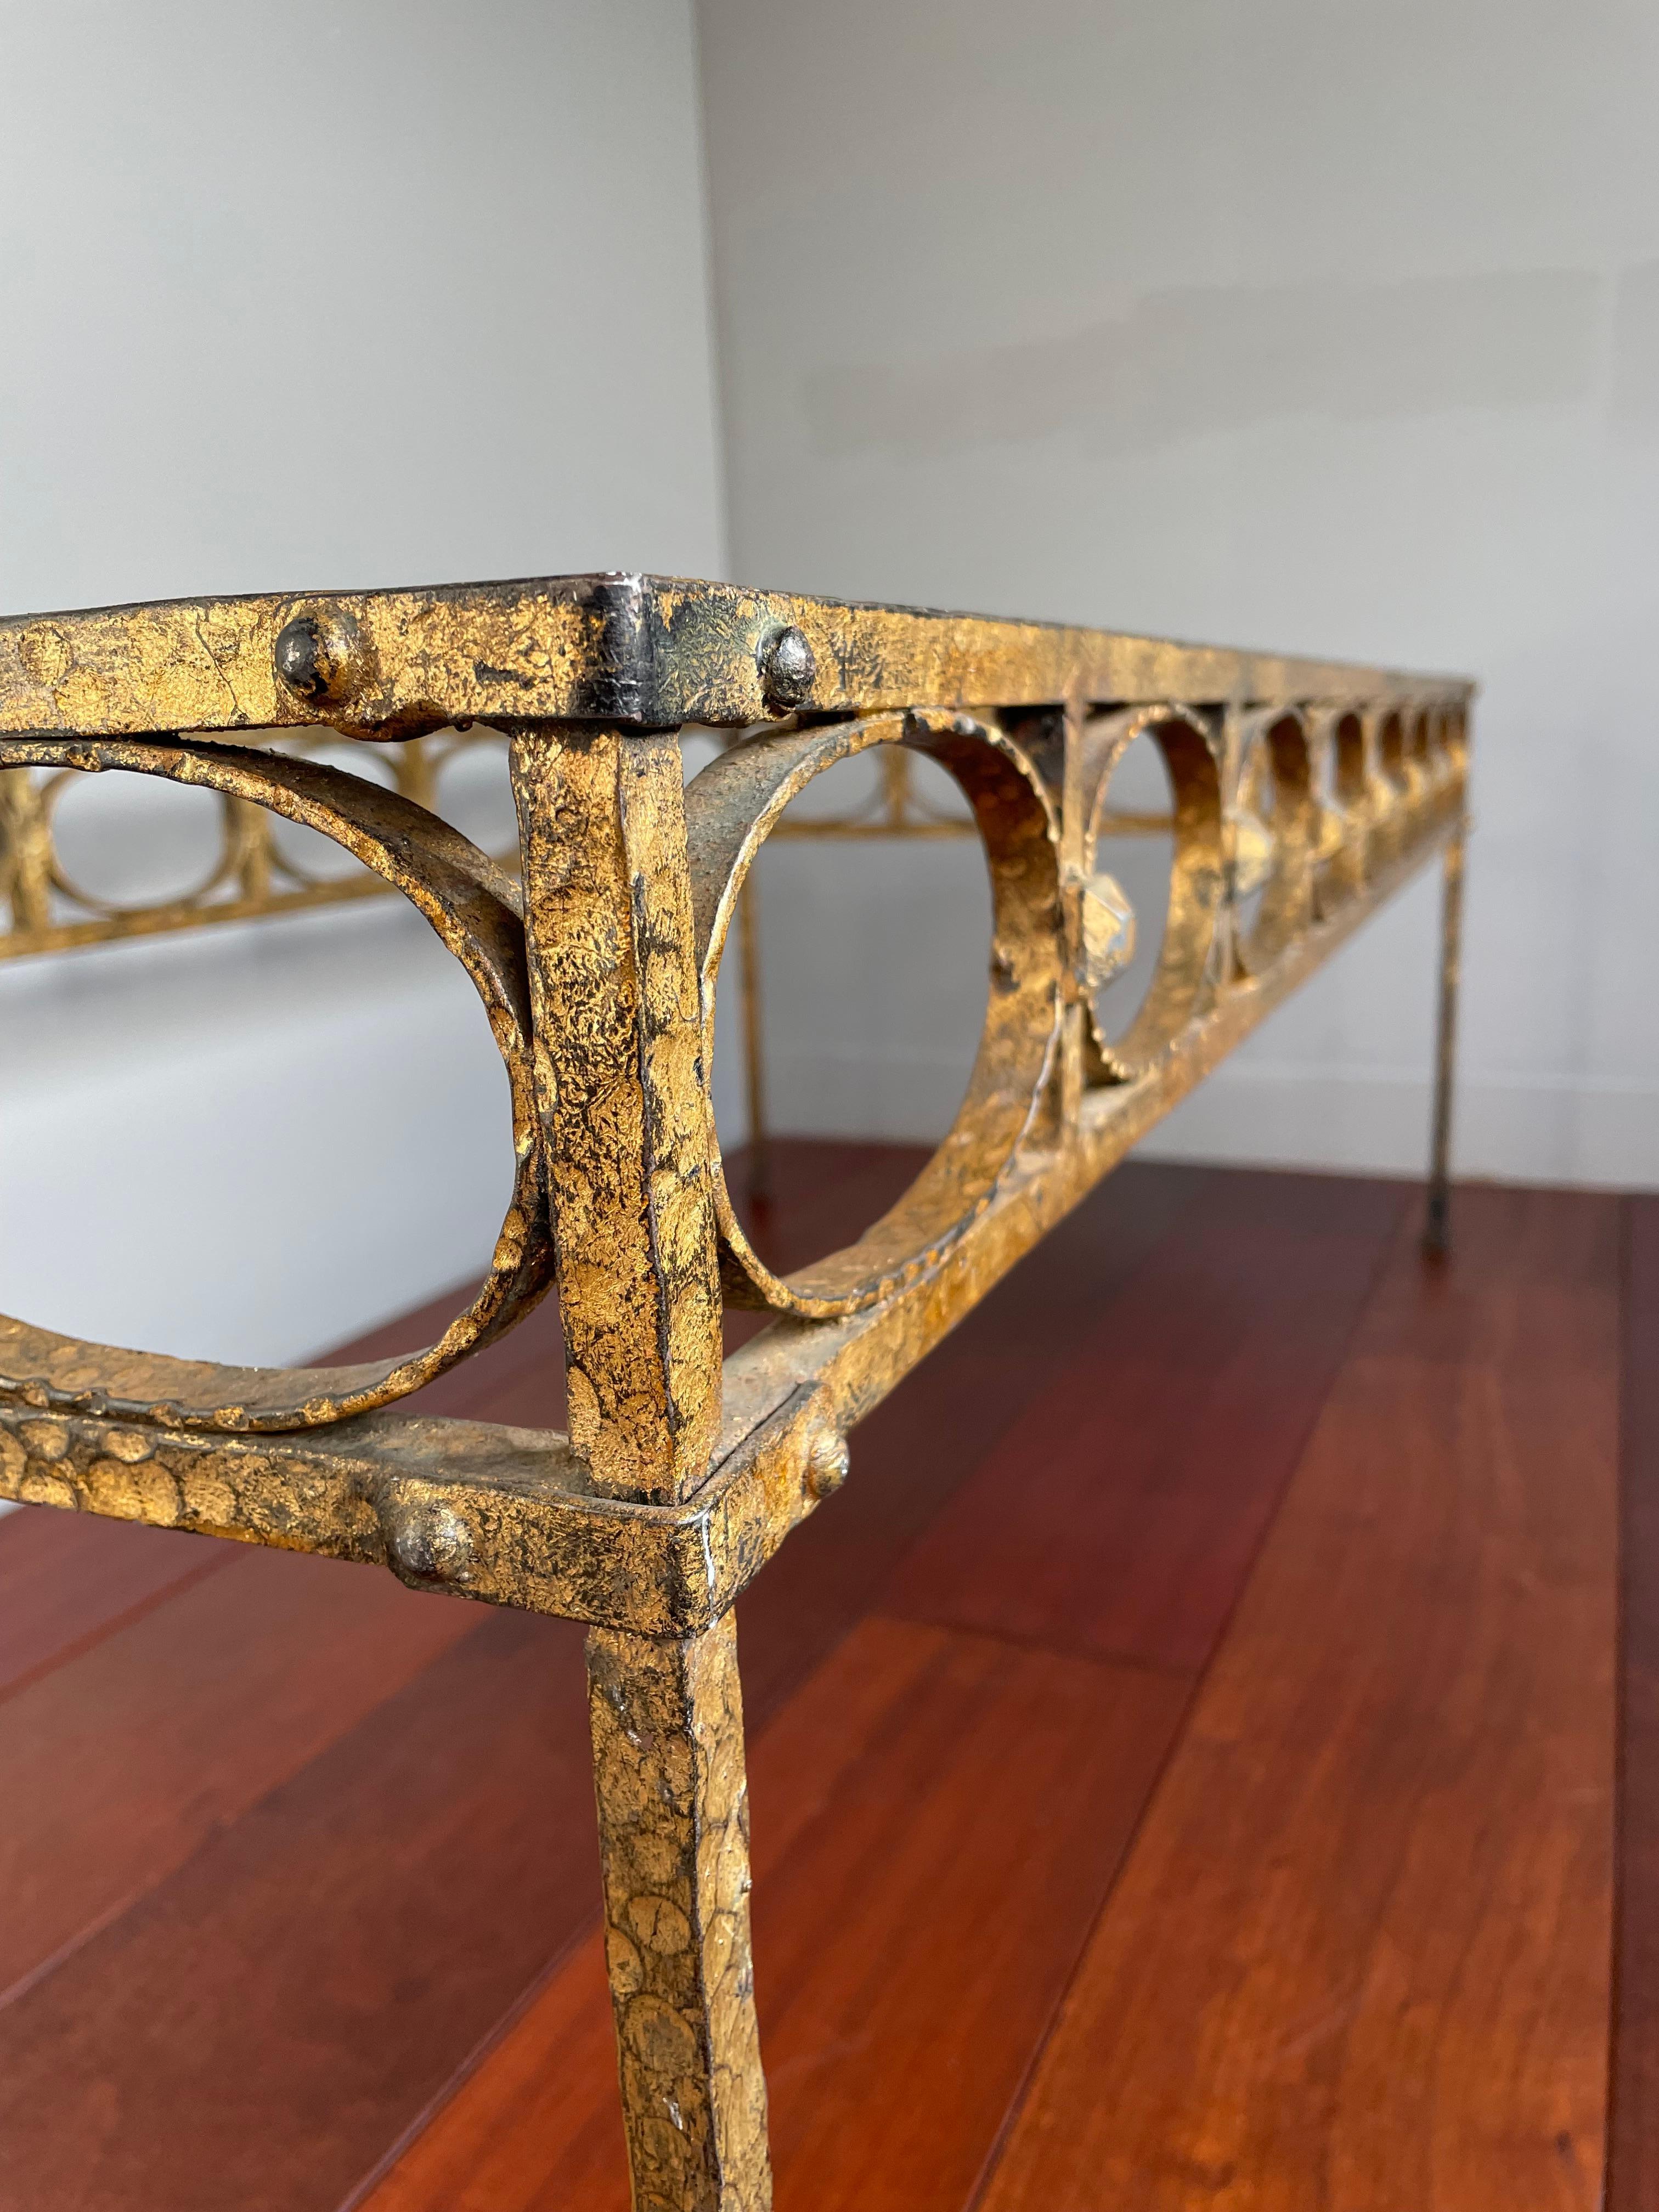 Stunning Midcentury Modern Gilt Wrought Iron Coffee Table Base by Ferro Art 1950 For Sale 11